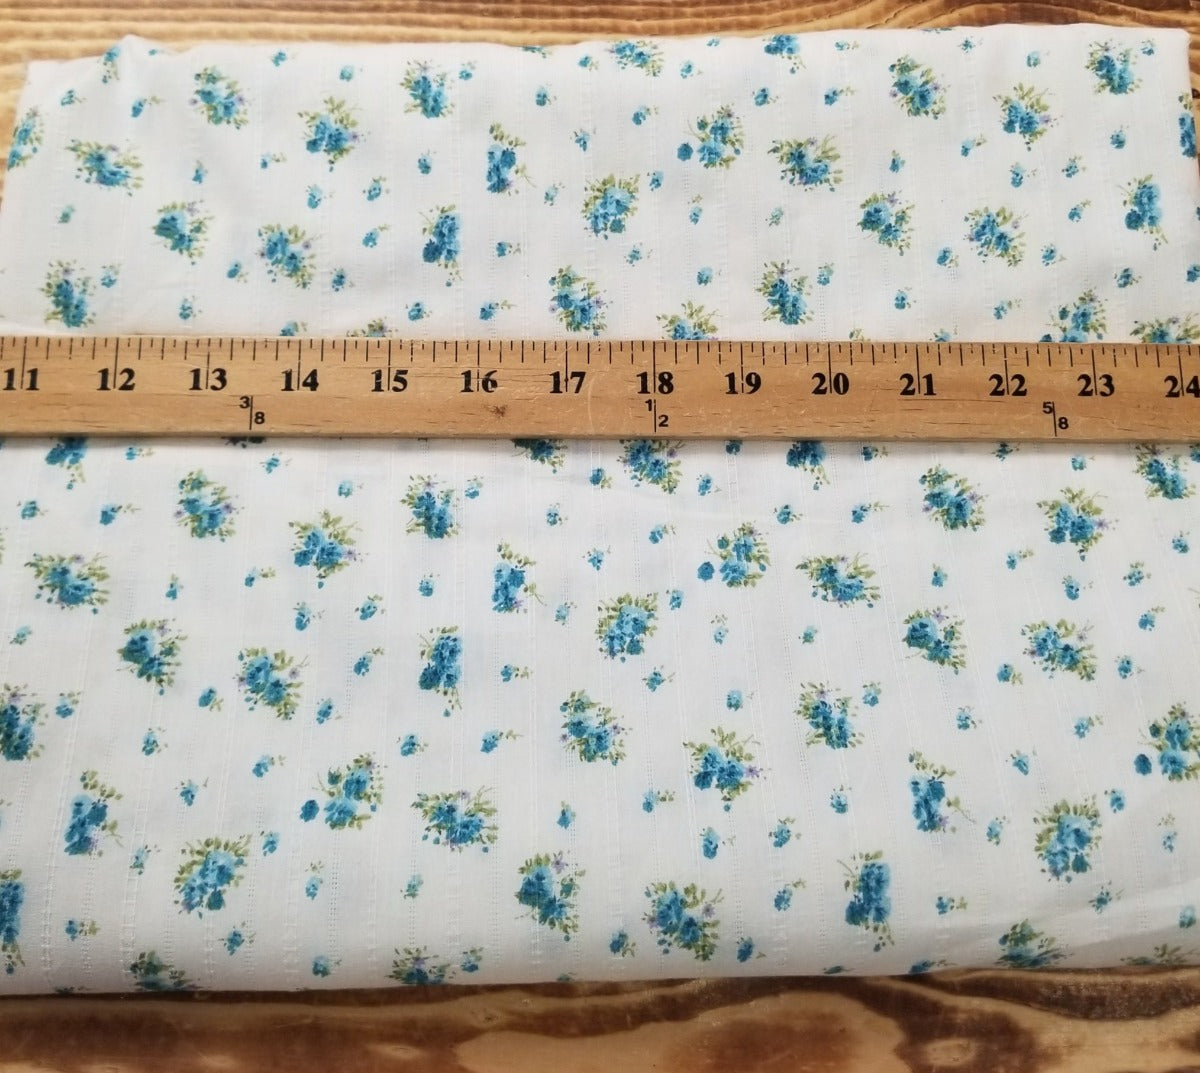 Designer Deadstock Vintage Cottage Roses White and Blue 100% Cotton Textured 3oz Lawn- Sold by the yard